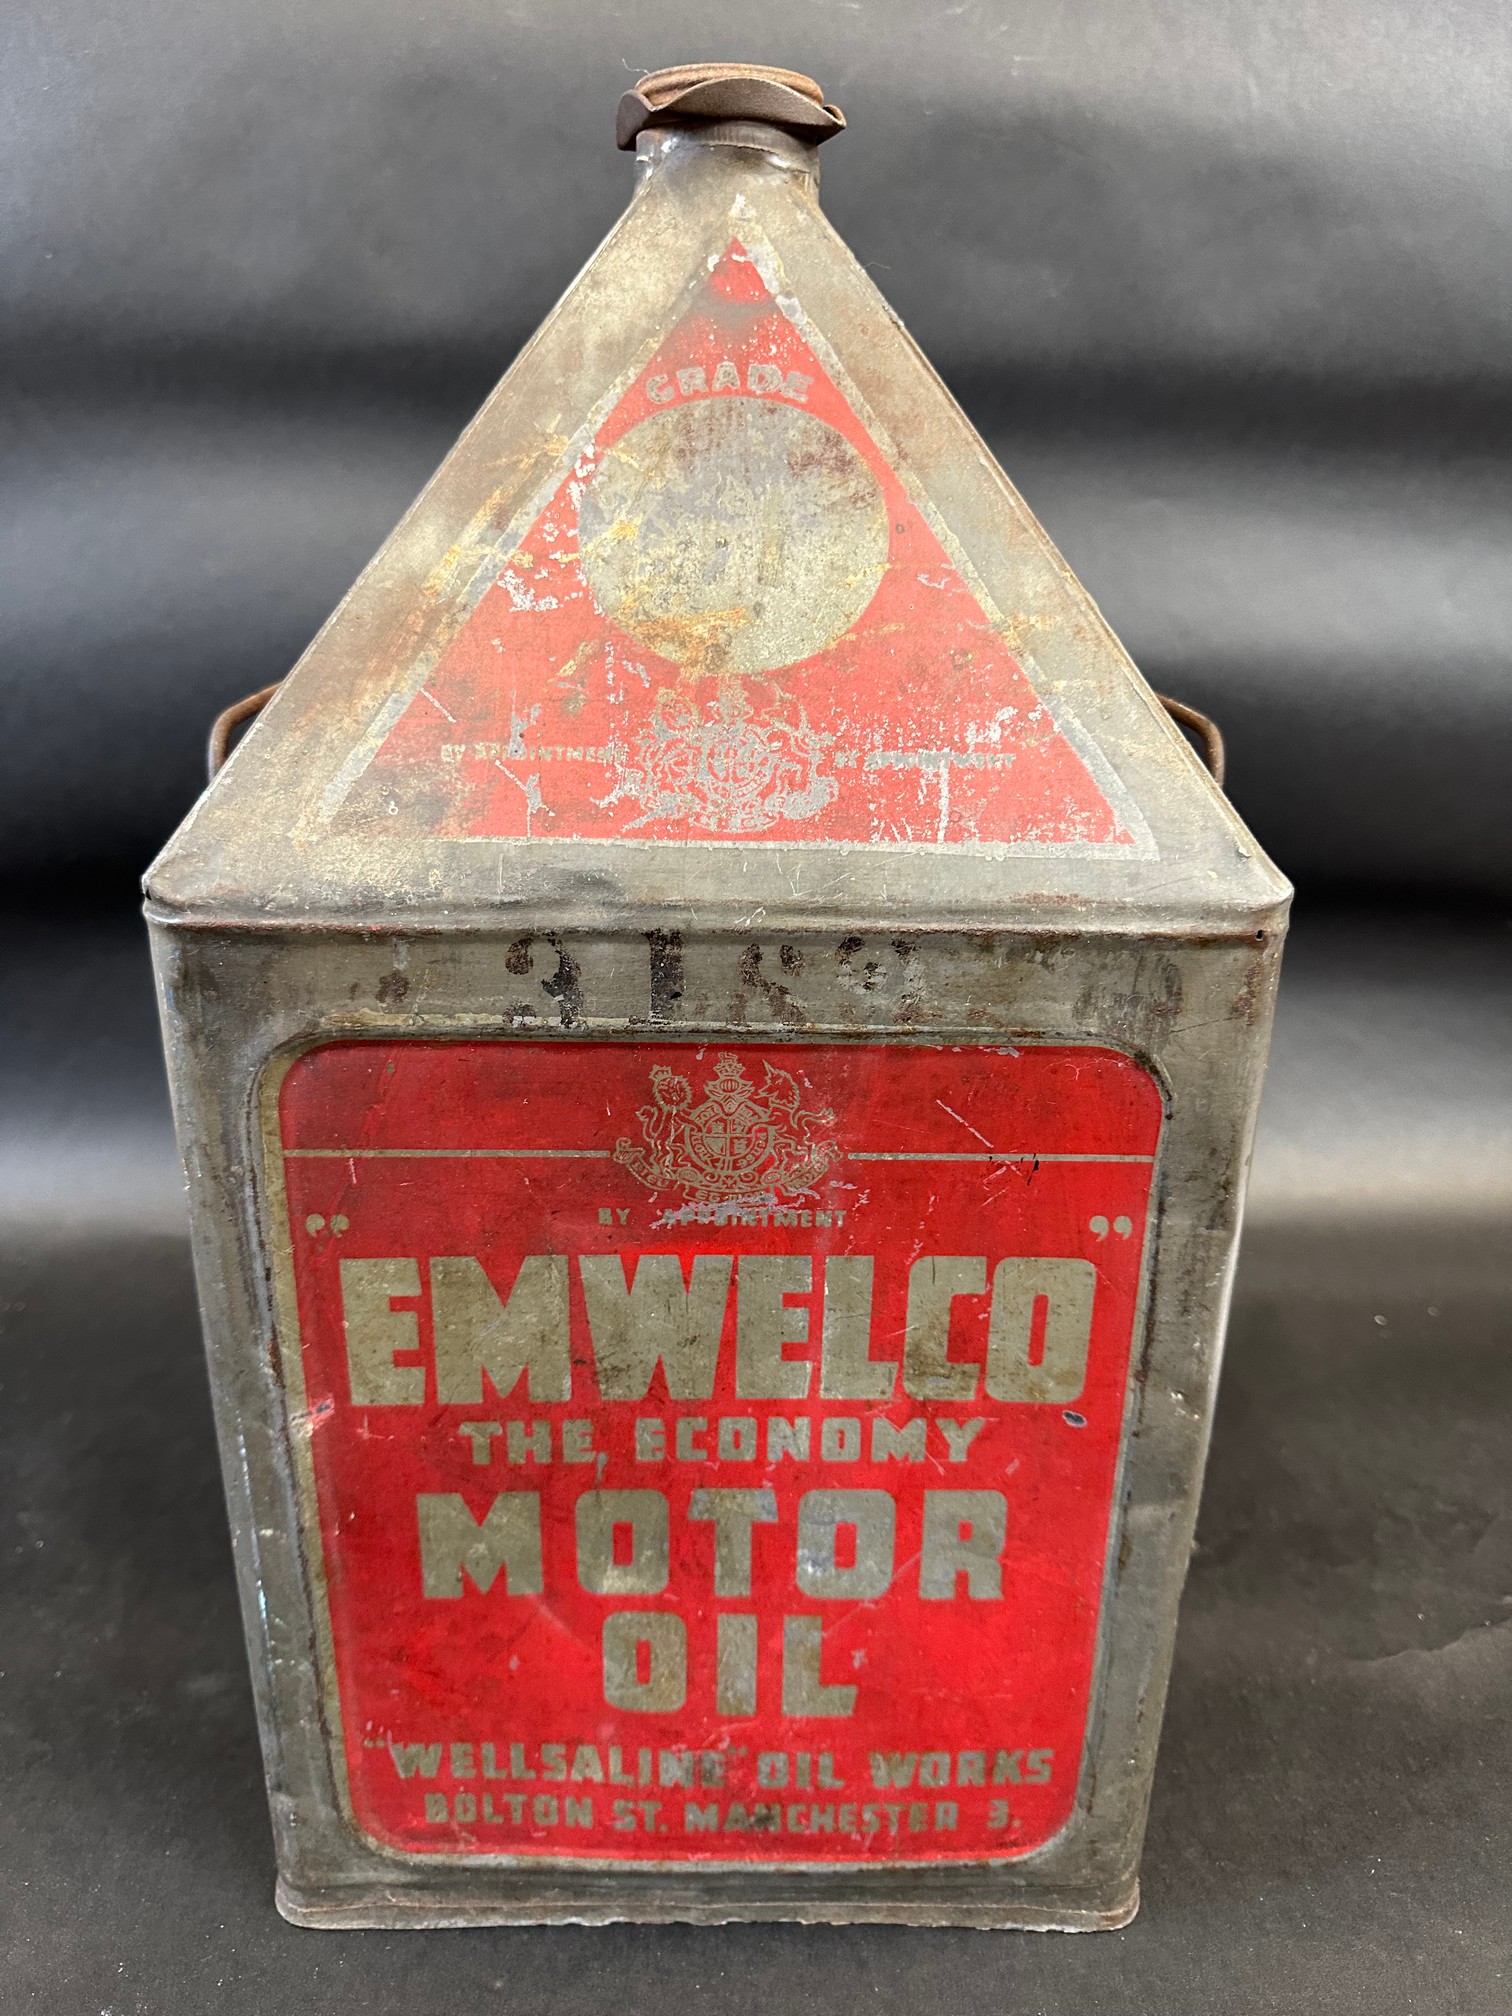 A Wellsaline 'Emwelco' Motor Oil five gallon pyramid can. - Image 4 of 6